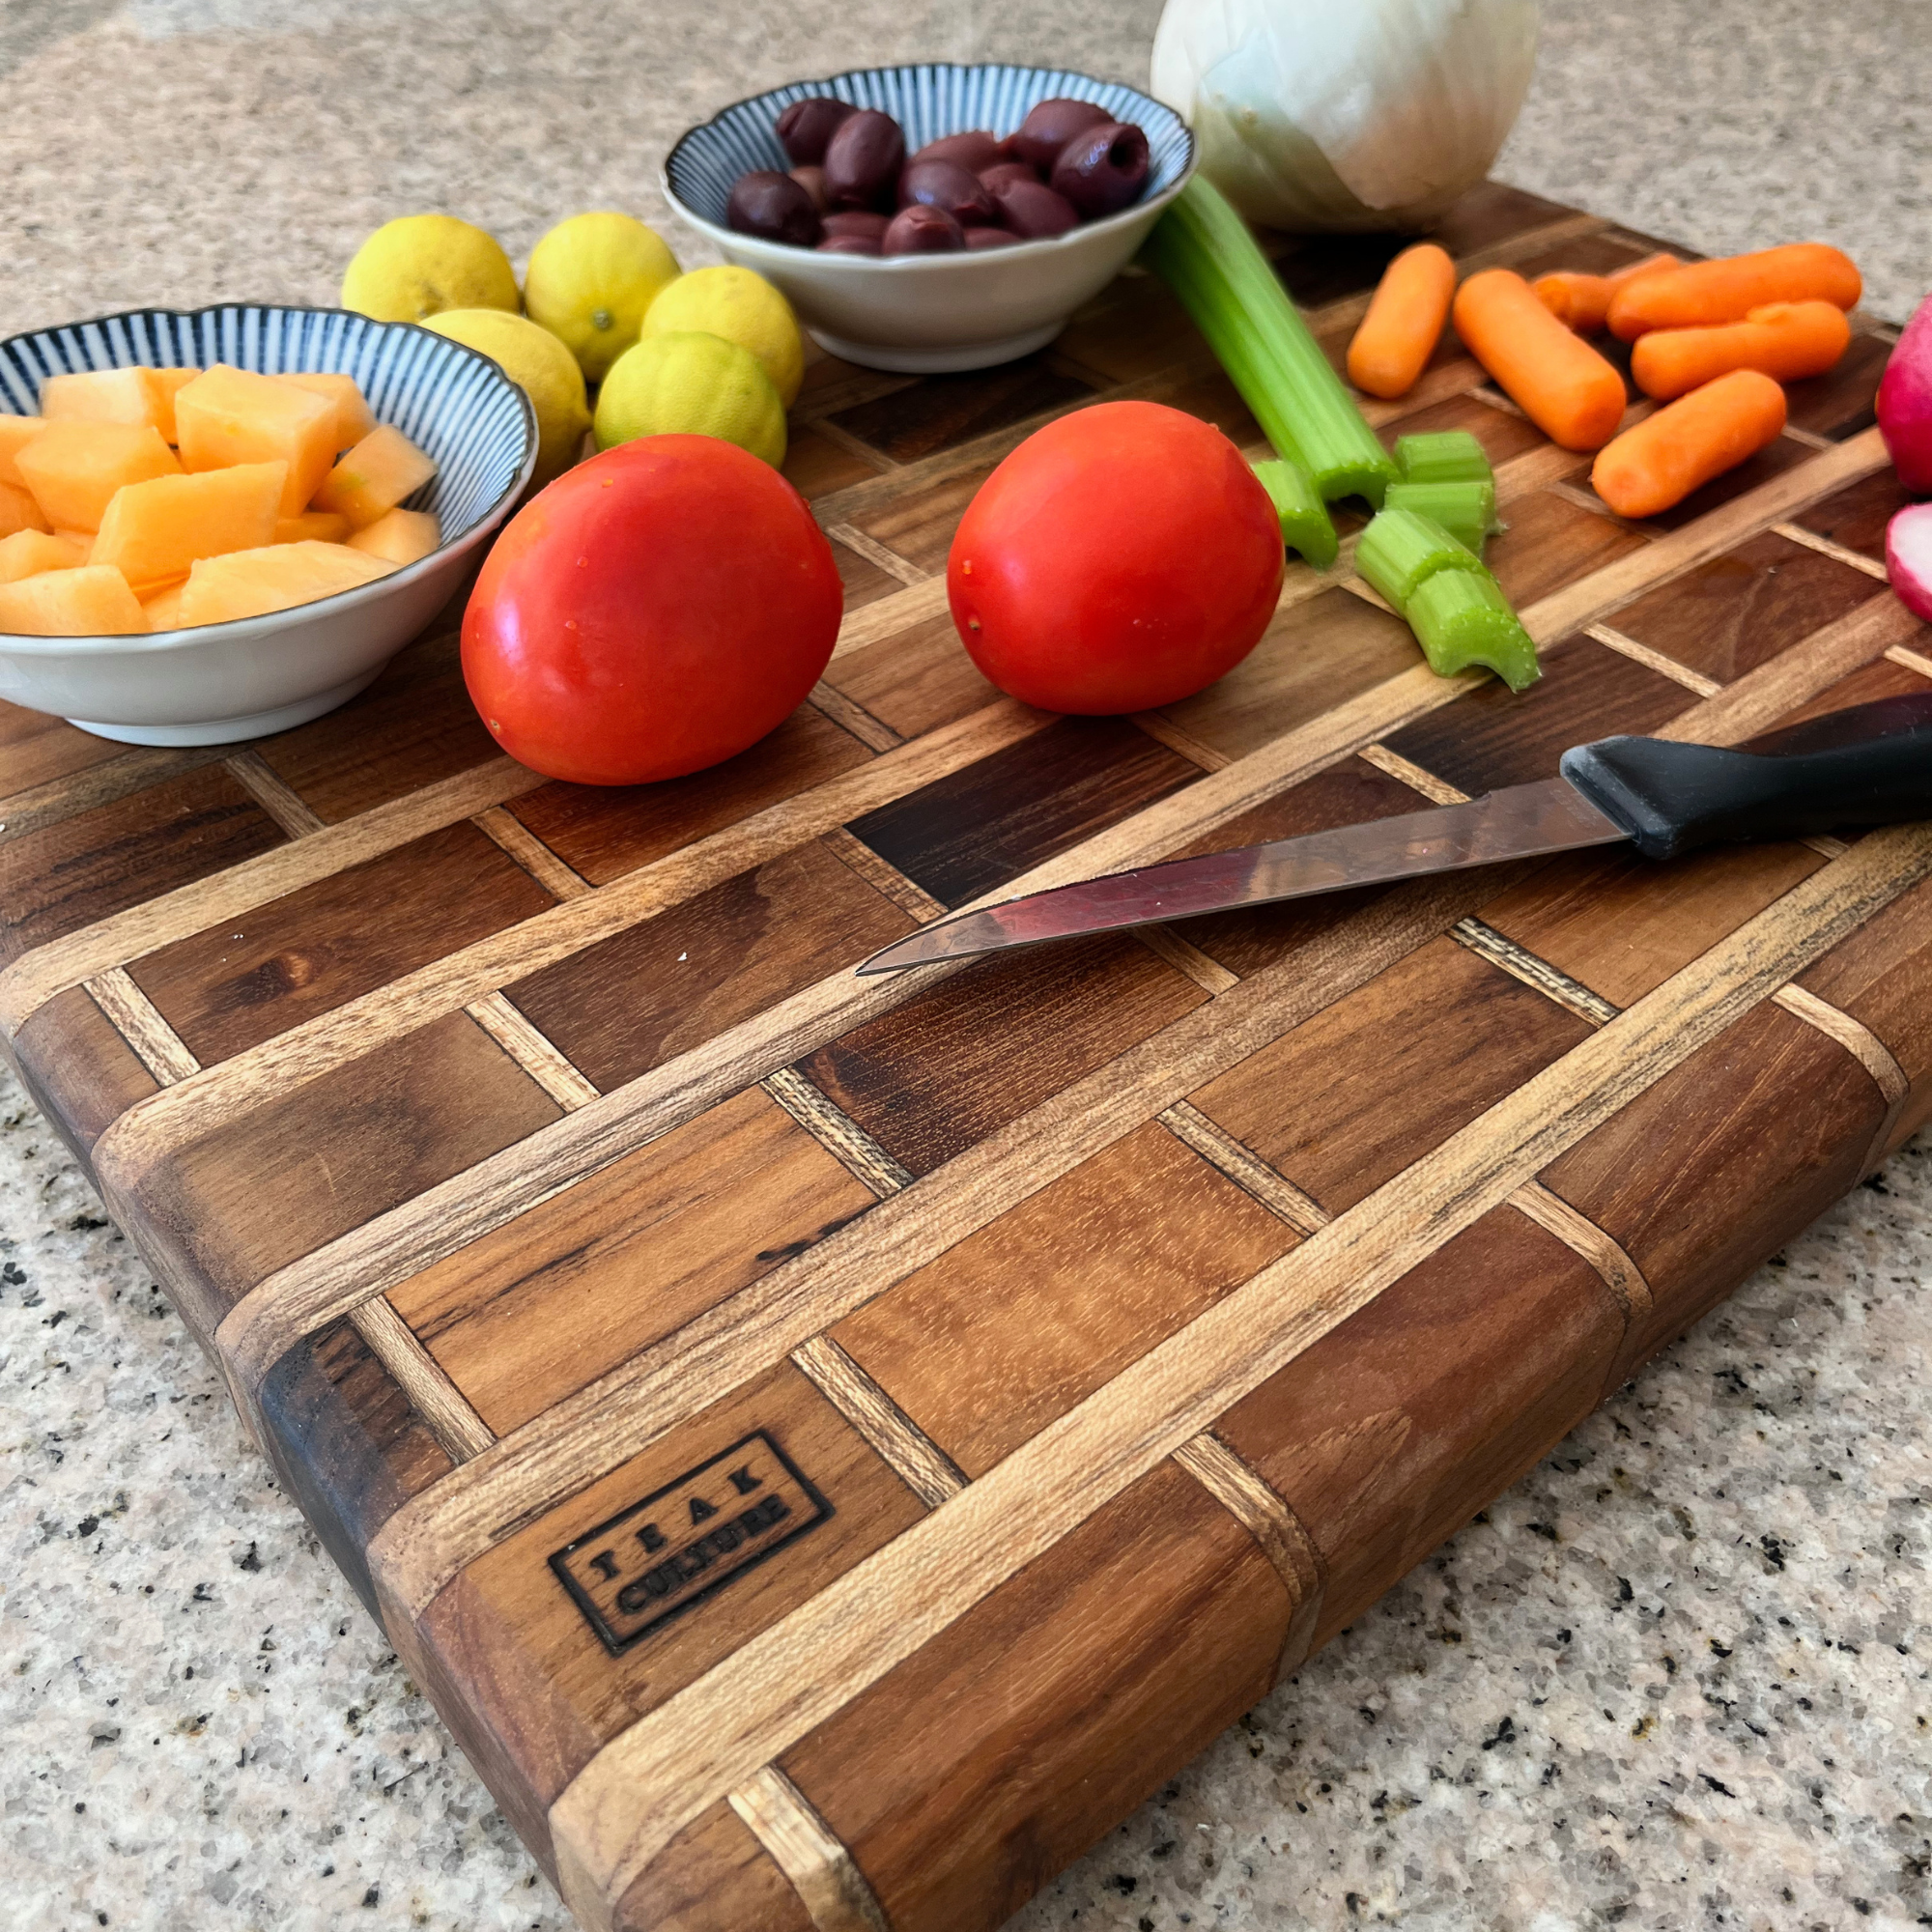 Teak Root Cutting Board And Serving Tray - Curvy